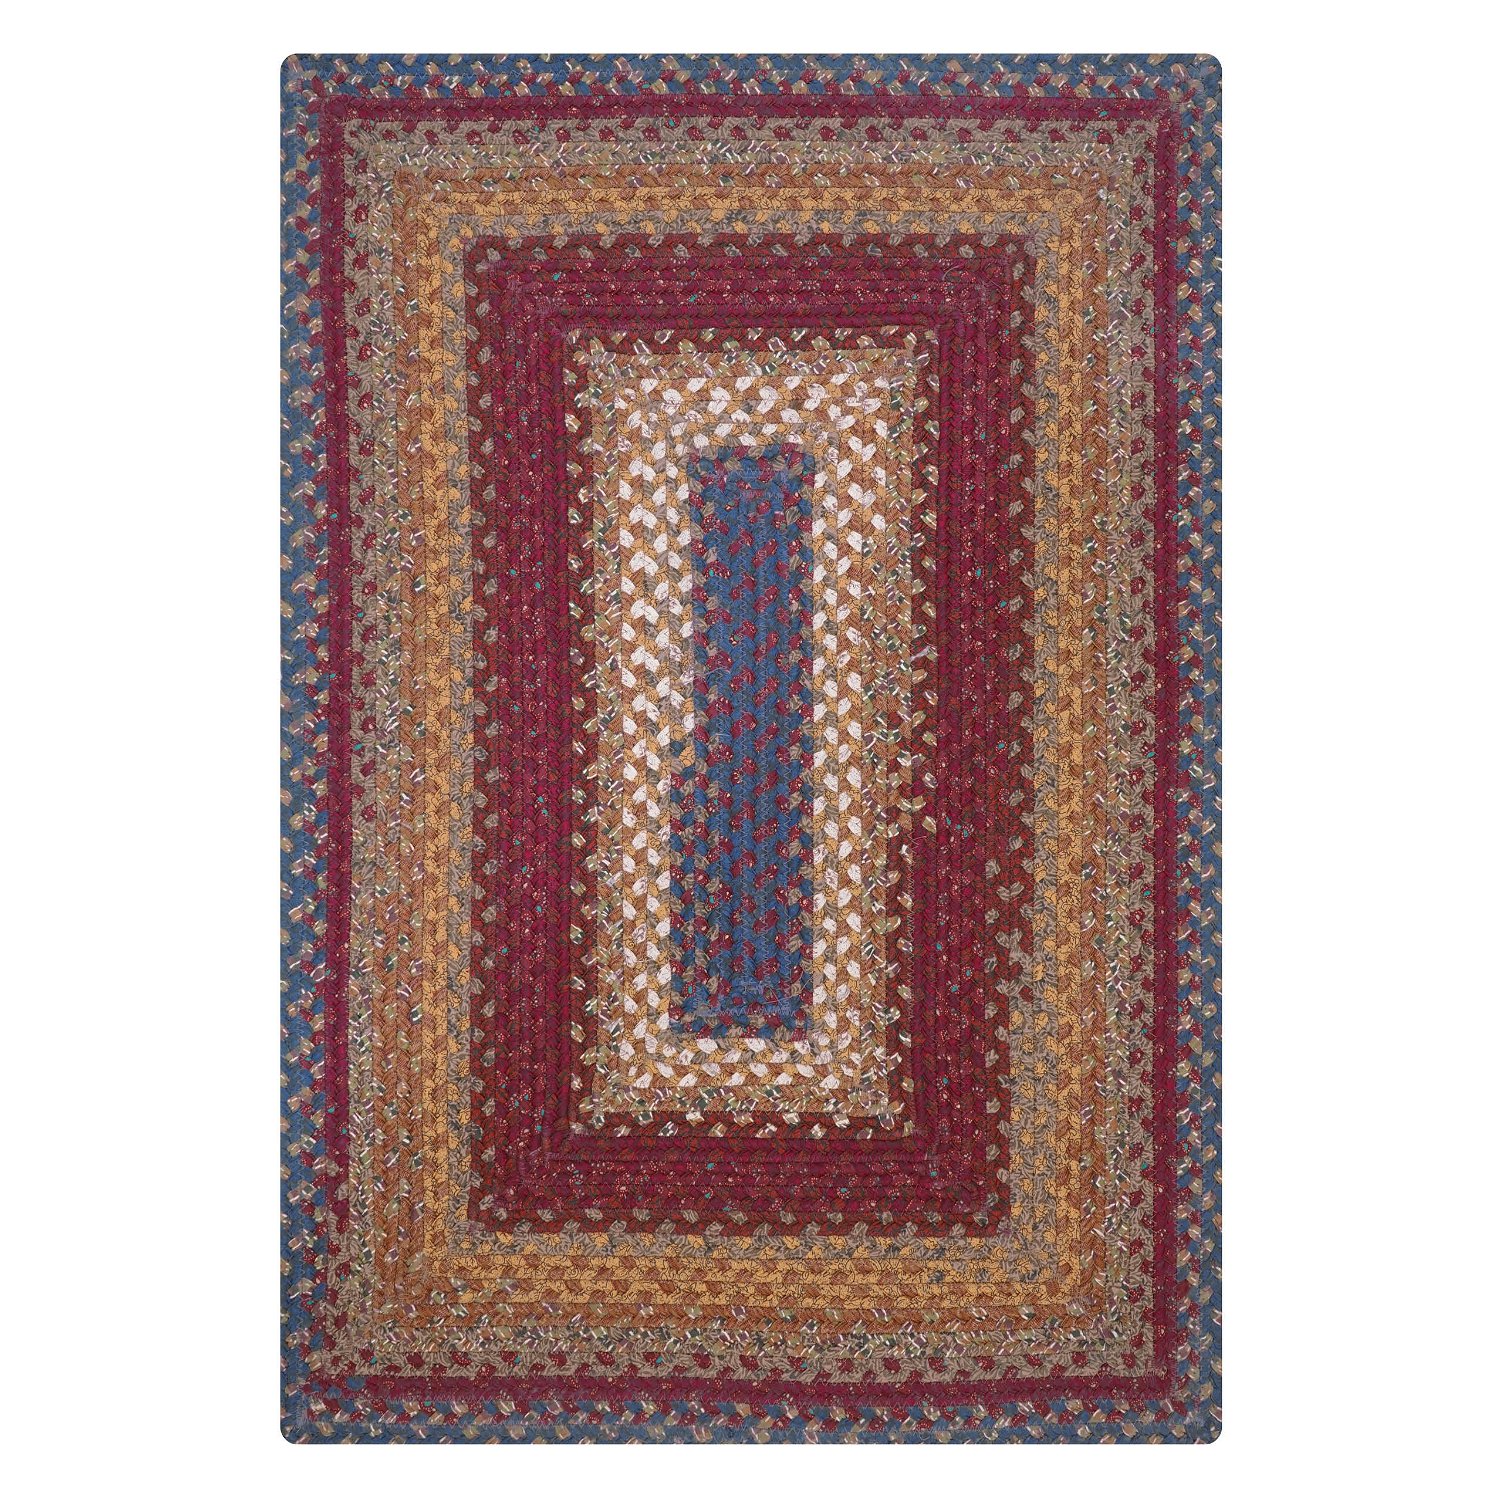 Log Cabin Step Blue-Burgundy-Brown Oval Cotton Braided Rugs Reversible